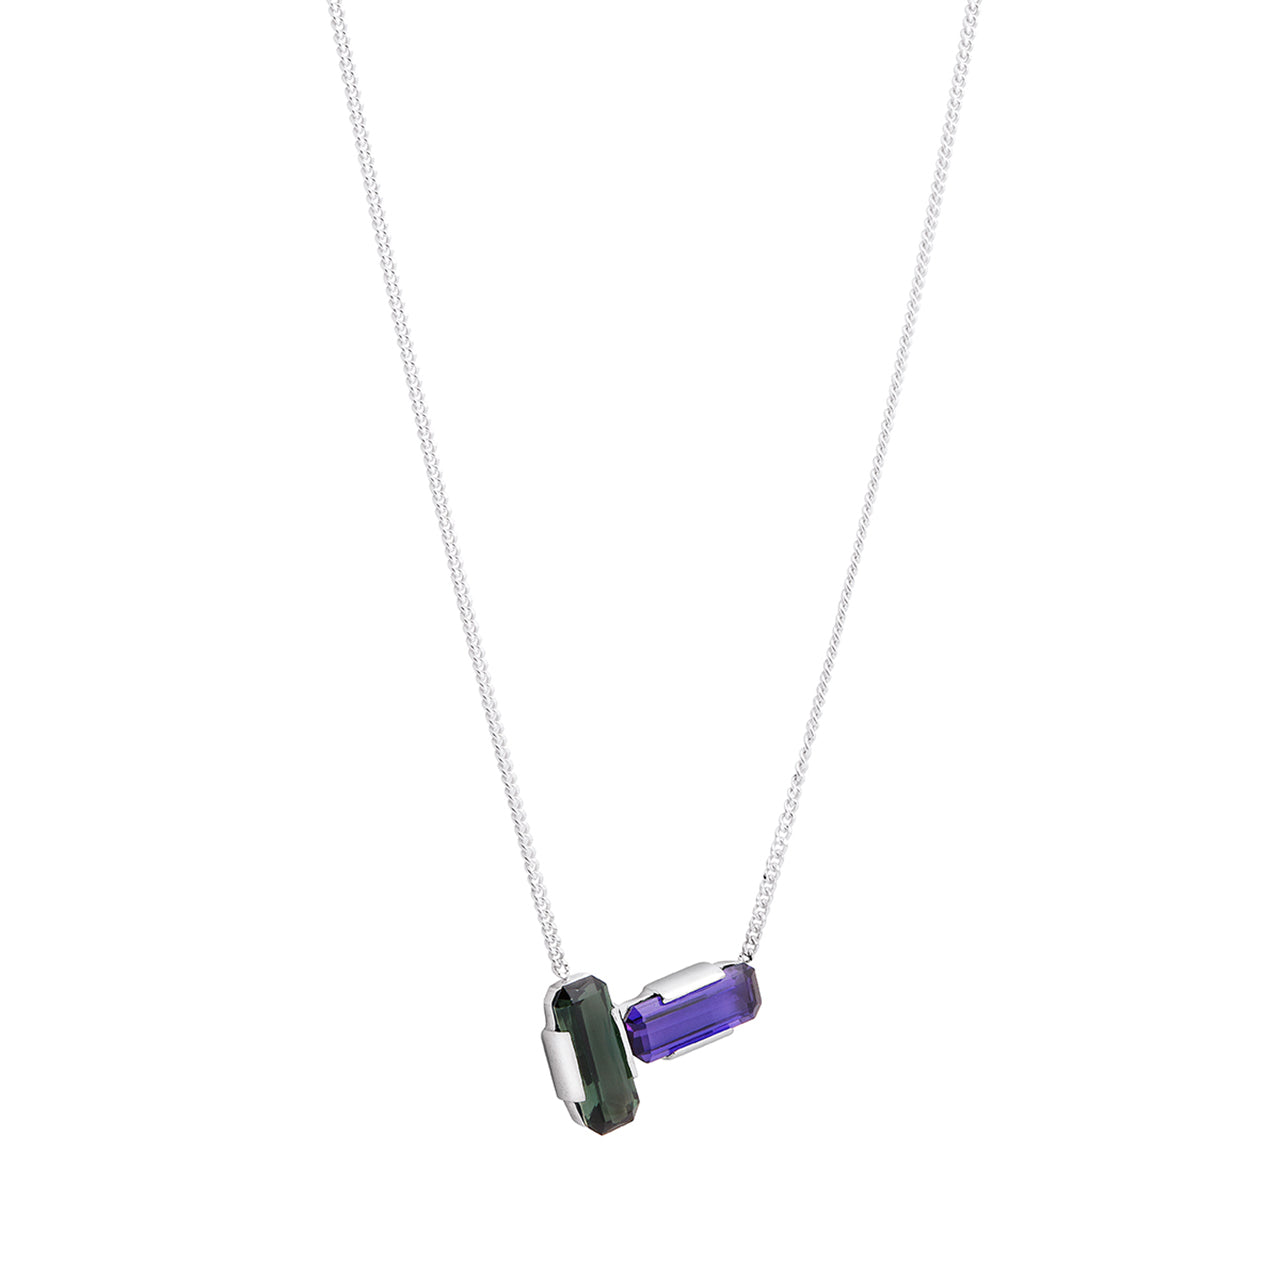 silver apex necklace with vintage purple and green stones